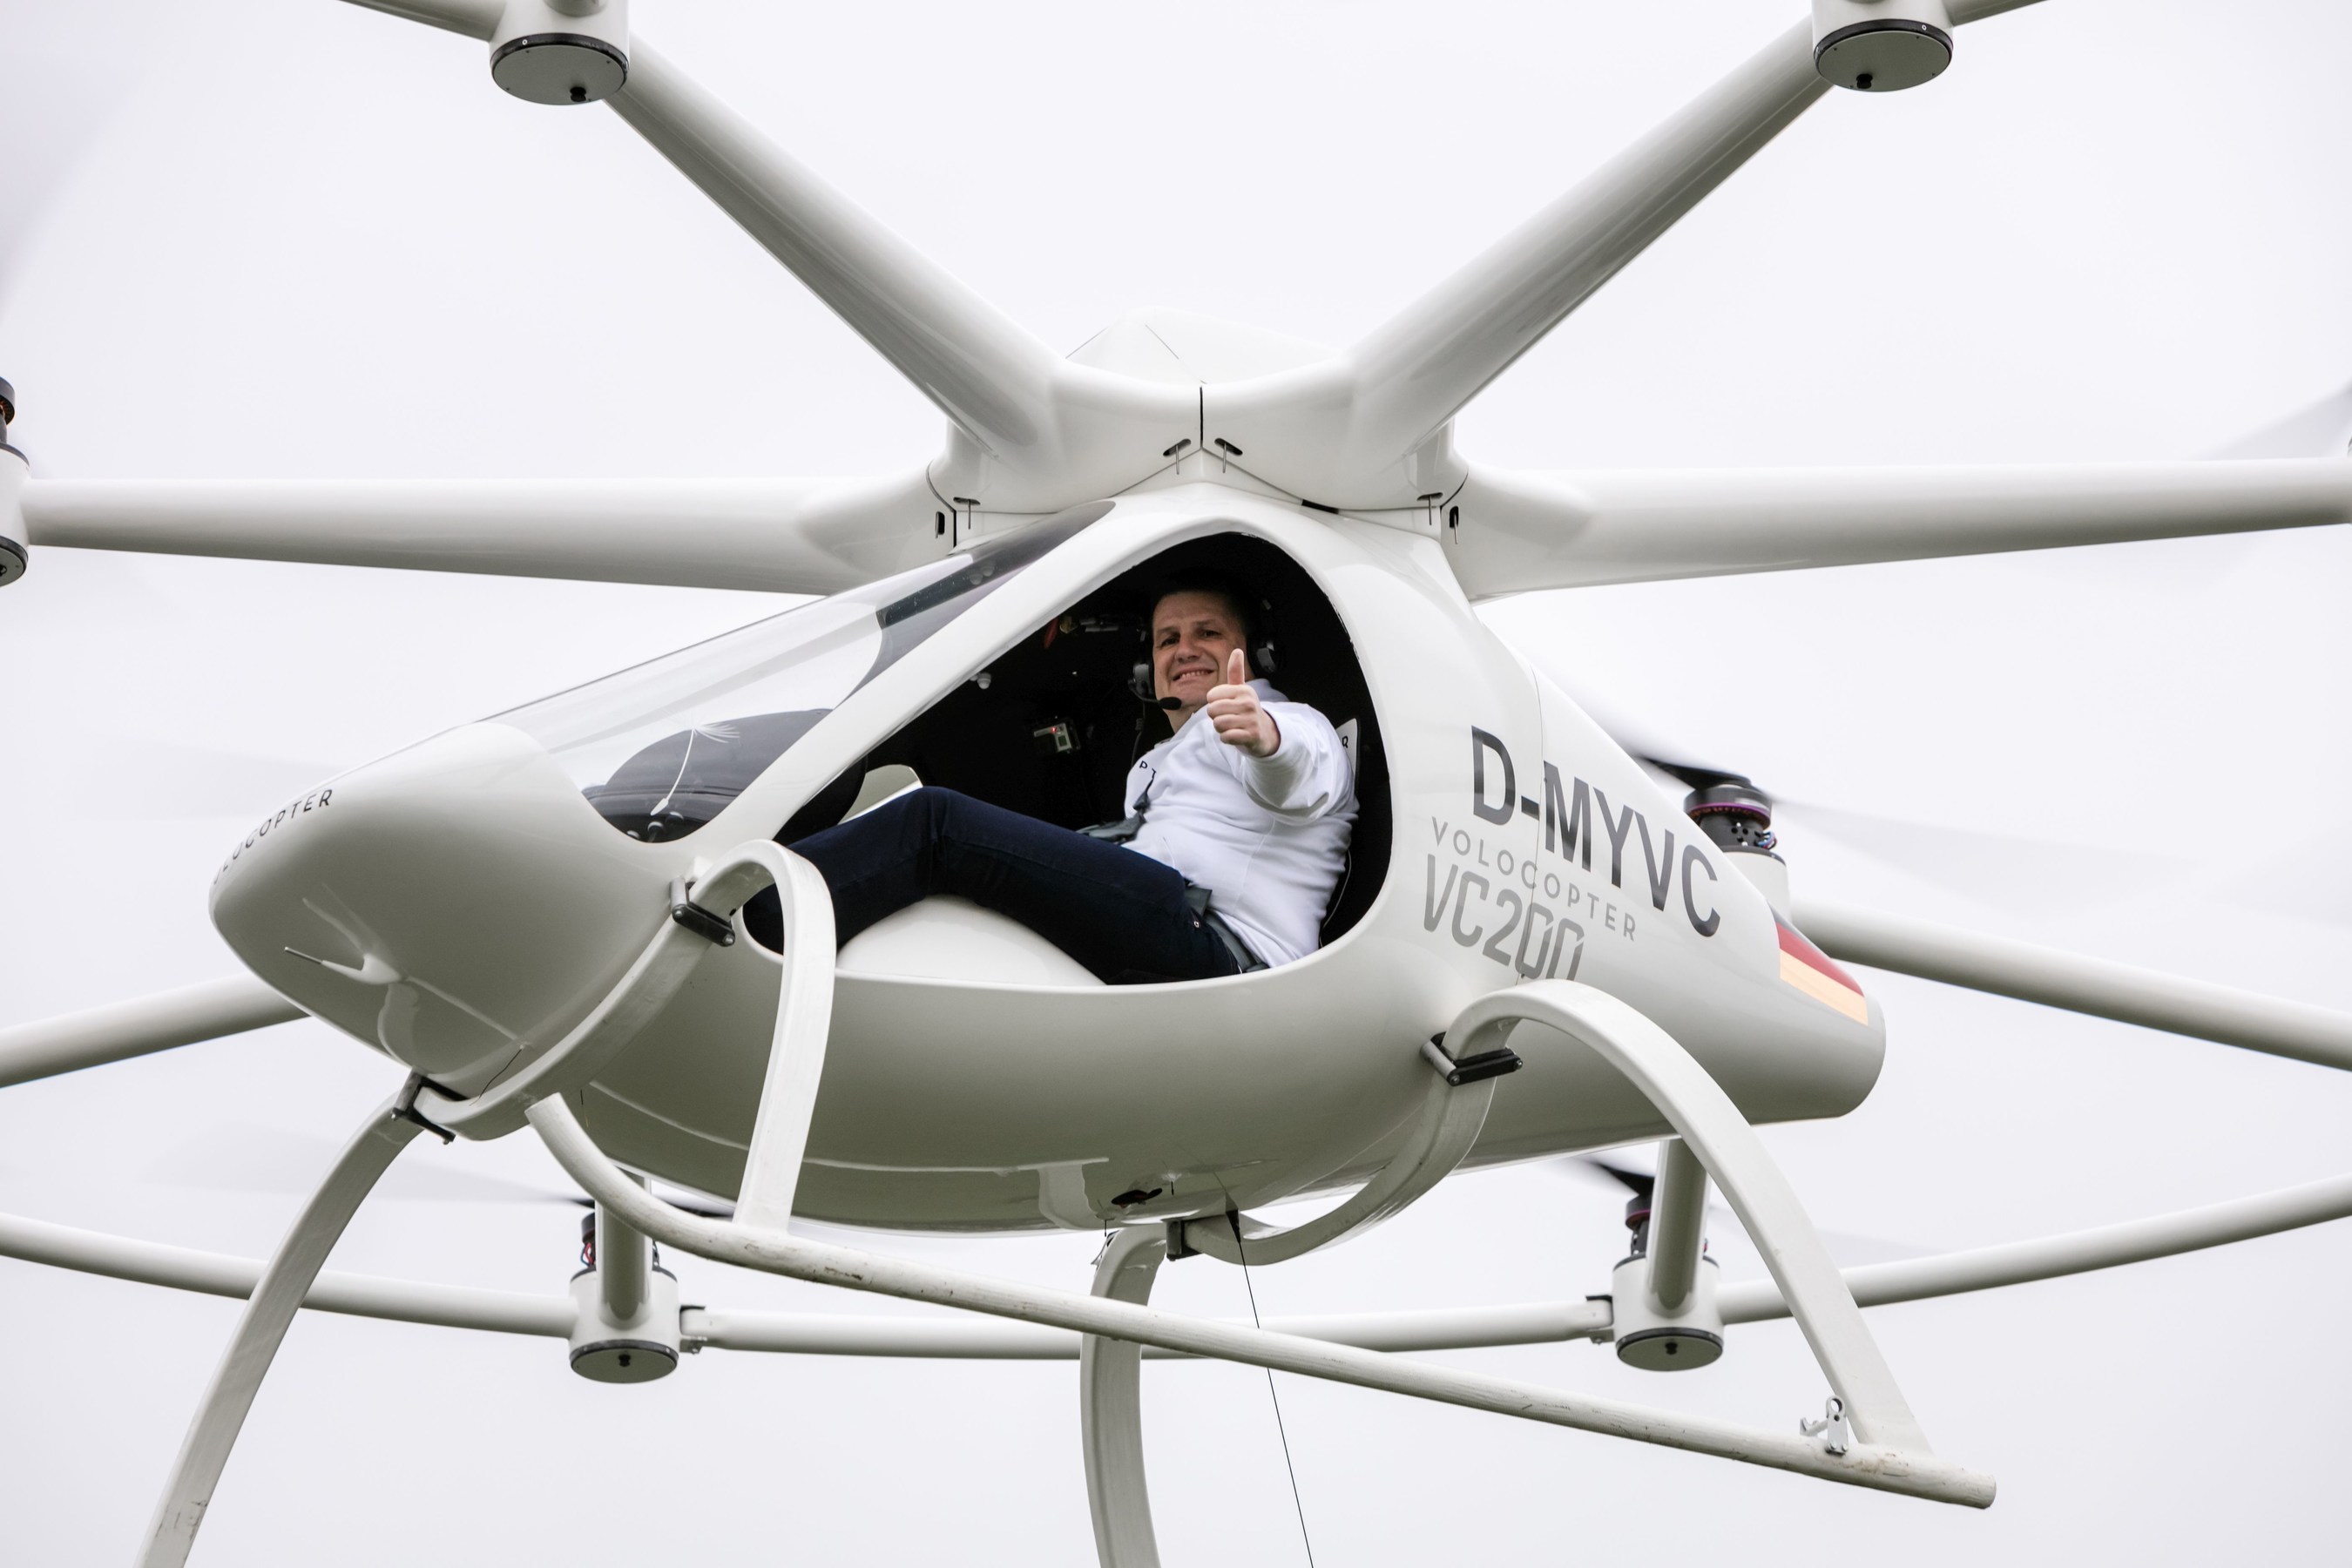 World premiere of manned flights in the Volocopter. e-volo Managing Director Alexander Zosel gives thumbs up to his team for the flight performance of the Volocopter.
Location: Airfield in Southern Germany (PRNewsFoto/e-volo)